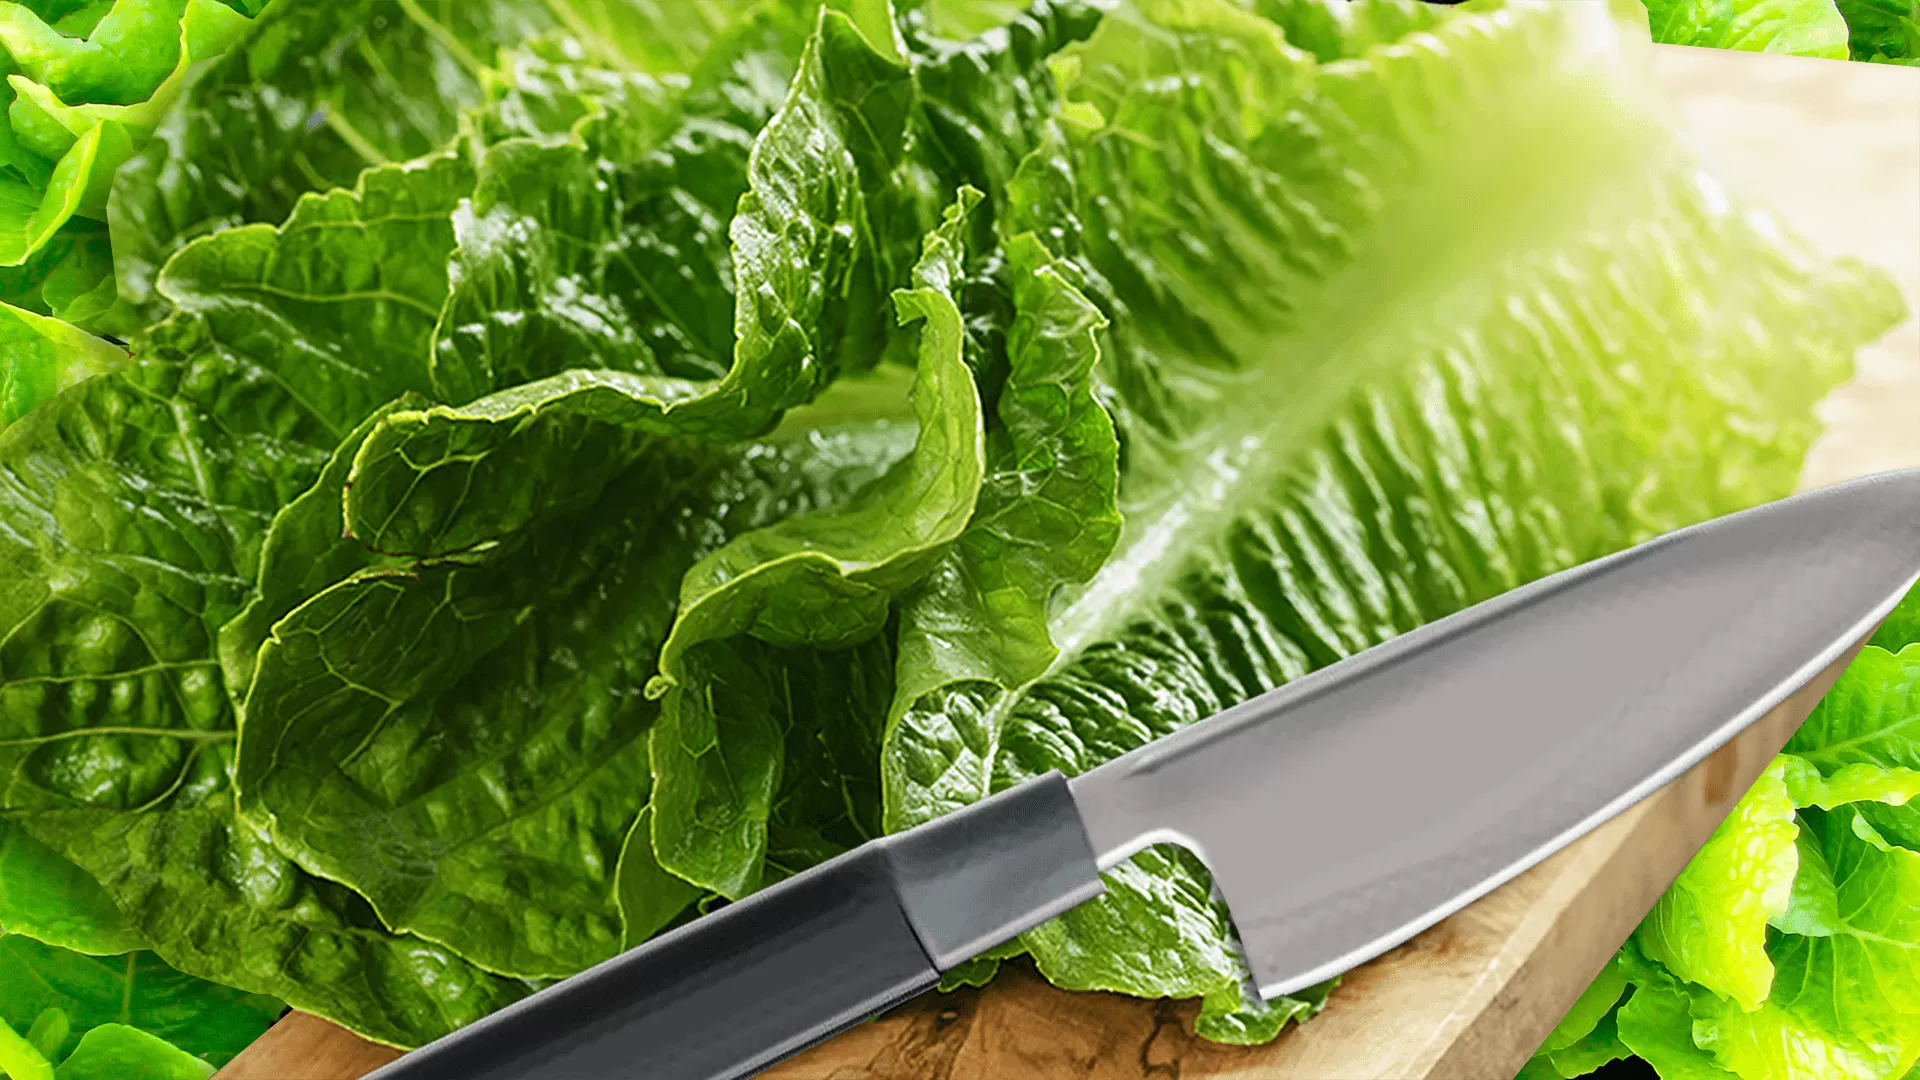 How to Cut Lettuce for Salad and Wraps with the Knife